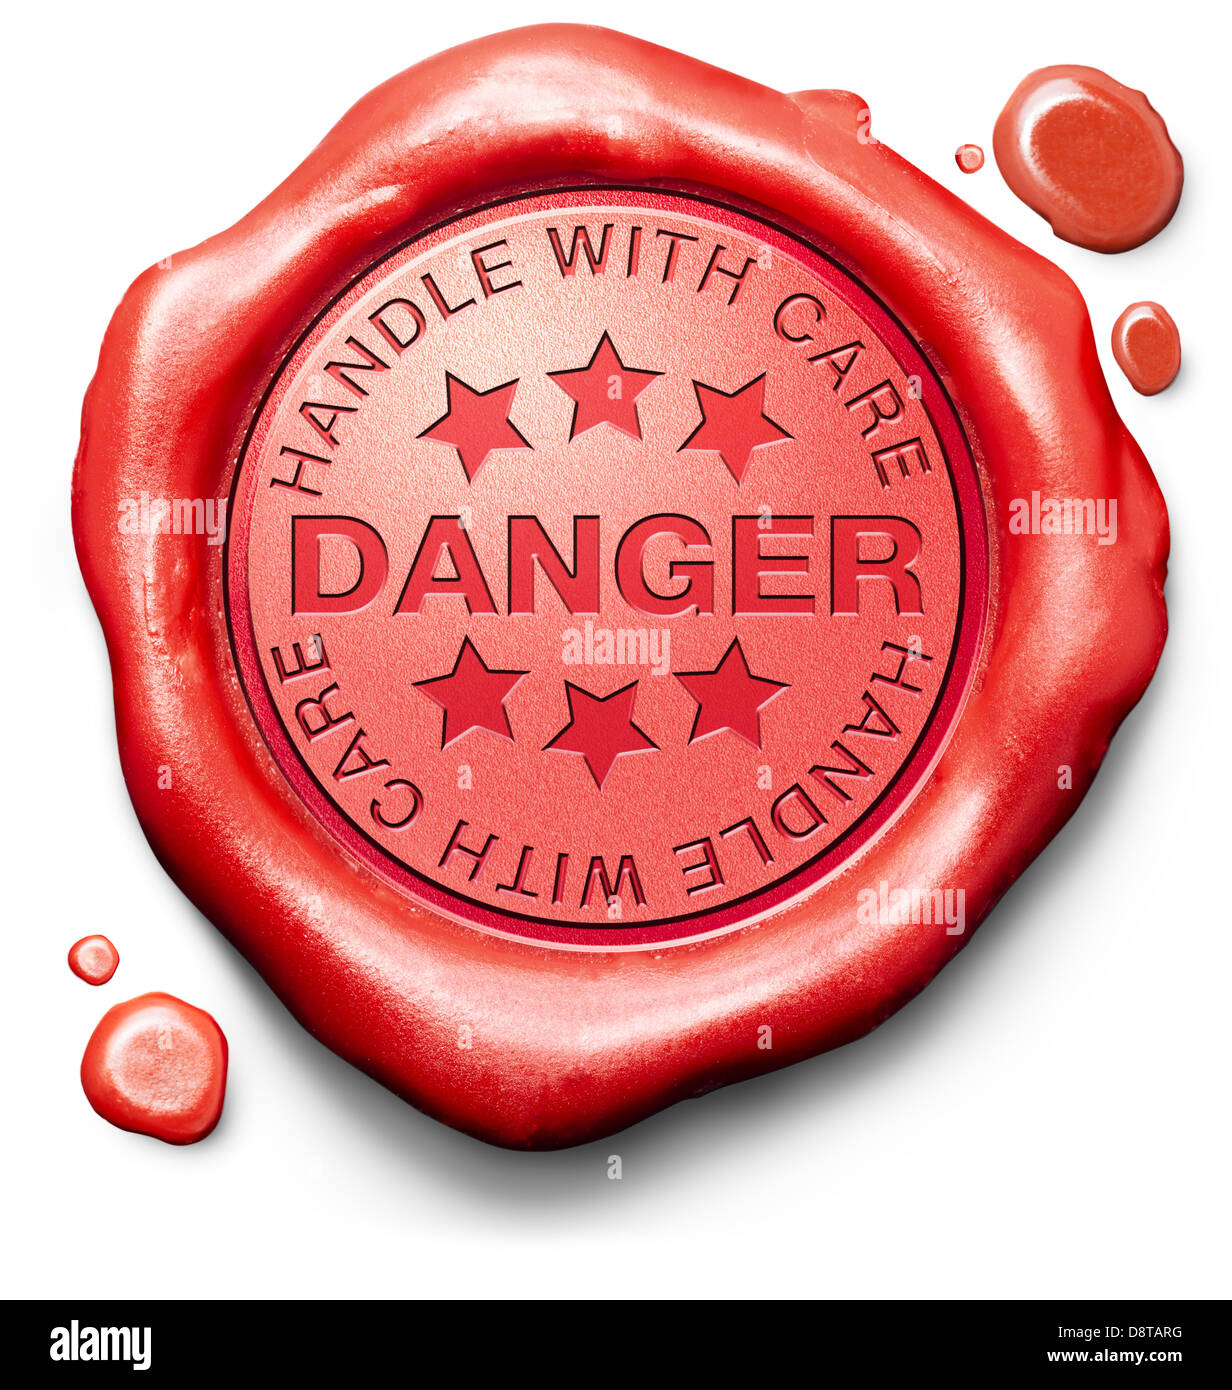 danger handle with care dangerous product or area being careful red warning sign icon or stamp Stock Photo